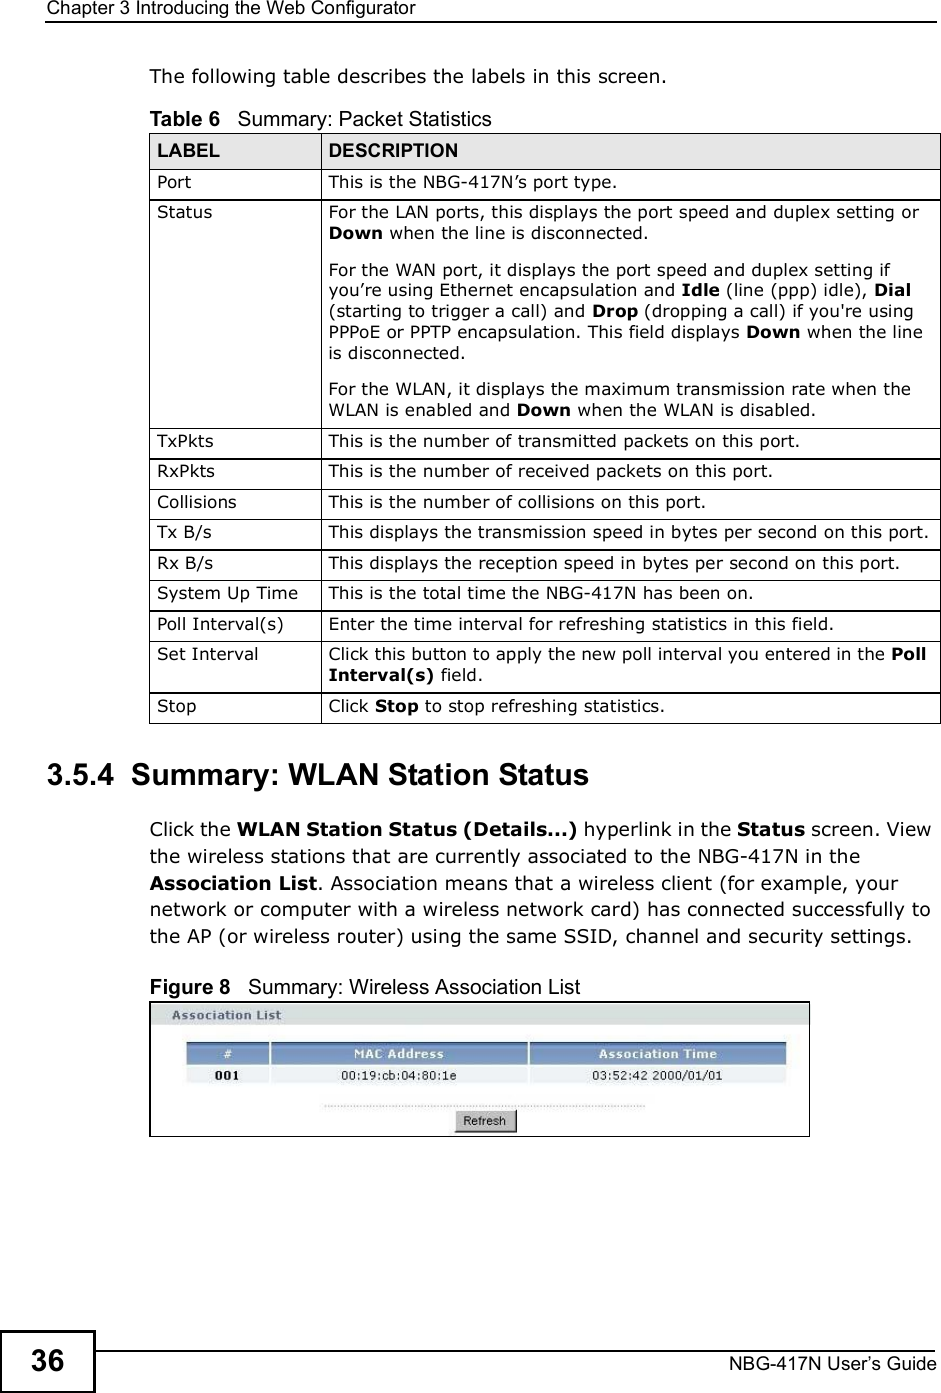 Chapter 3Introducing the Web ConfiguratorNBG-417N User s Guide36The following table describes the labels in this screen.3.5.4  Summary: WLAN Station Status     Click the WLAN Station Status (Details...) hyperlink in the Status screen. View the wireless stations that are currently associated to the NBG-417N in the Association List. Association means that a wireless client (for example, your network or computer with a wireless network card) has connected successfully to the AP (or wireless router) using the same SSID, channel and security settings.Figure 8   Summary: Wireless Association ListTable 6   Summary: Packet StatisticsLABEL DESCRIPTIONPort This is the NBG-417N!s port type.Status  For the LAN ports, this displays the port speed and duplex setting or Down when the line is disconnected.For the WAN port, it displays the port speed and duplex setting if you!re using Ethernet encapsulation and Idle (line (ppp) idle), Dial (starting to trigger a call) and Drop (dropping a call) if you&apos;re using PPPoE or PPTP encapsulation. This field displays Down when the line is disconnected.For the WLAN, it displays the maximum transmission rate when the WLAN is enabled and Down when the WLAN is disabled.TxPkts  This is the number of transmitted packets on this port.RxPkts  This is the number of received packets on this port.Collisions  This is the number of collisions on this port.Tx B/s  This displays the transmission speed in bytes per second on this port.Rx B/s This displays the reception speed in bytes per second on this port.System Up Time This is the total time the NBG-417N has been on.Poll Interval(s) Enter the time interval for refreshing statistics in this field.Set Interval Click this button to apply the new poll interval you entered in the Poll Interval(s) field.Stop Click Stop to stop refreshing statistics.